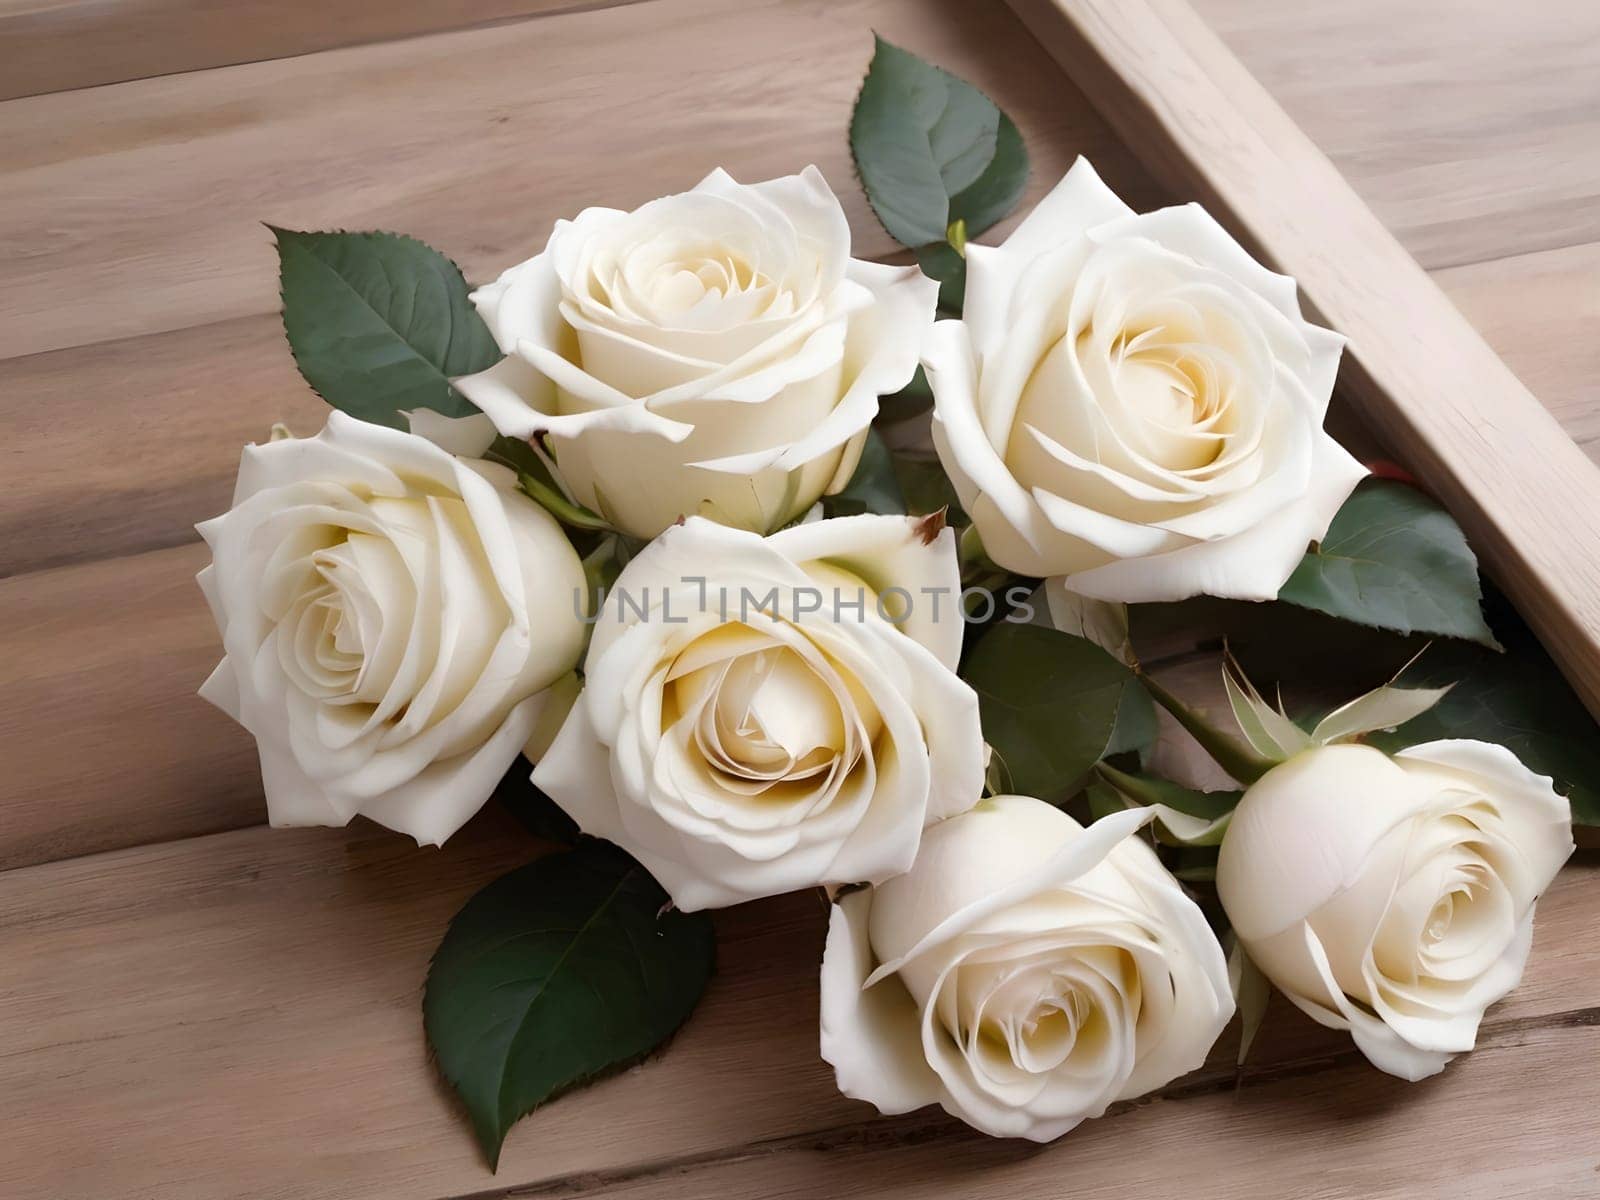 Wooden Serenity. Framed White Roses Creating a Timeless Display by mailos